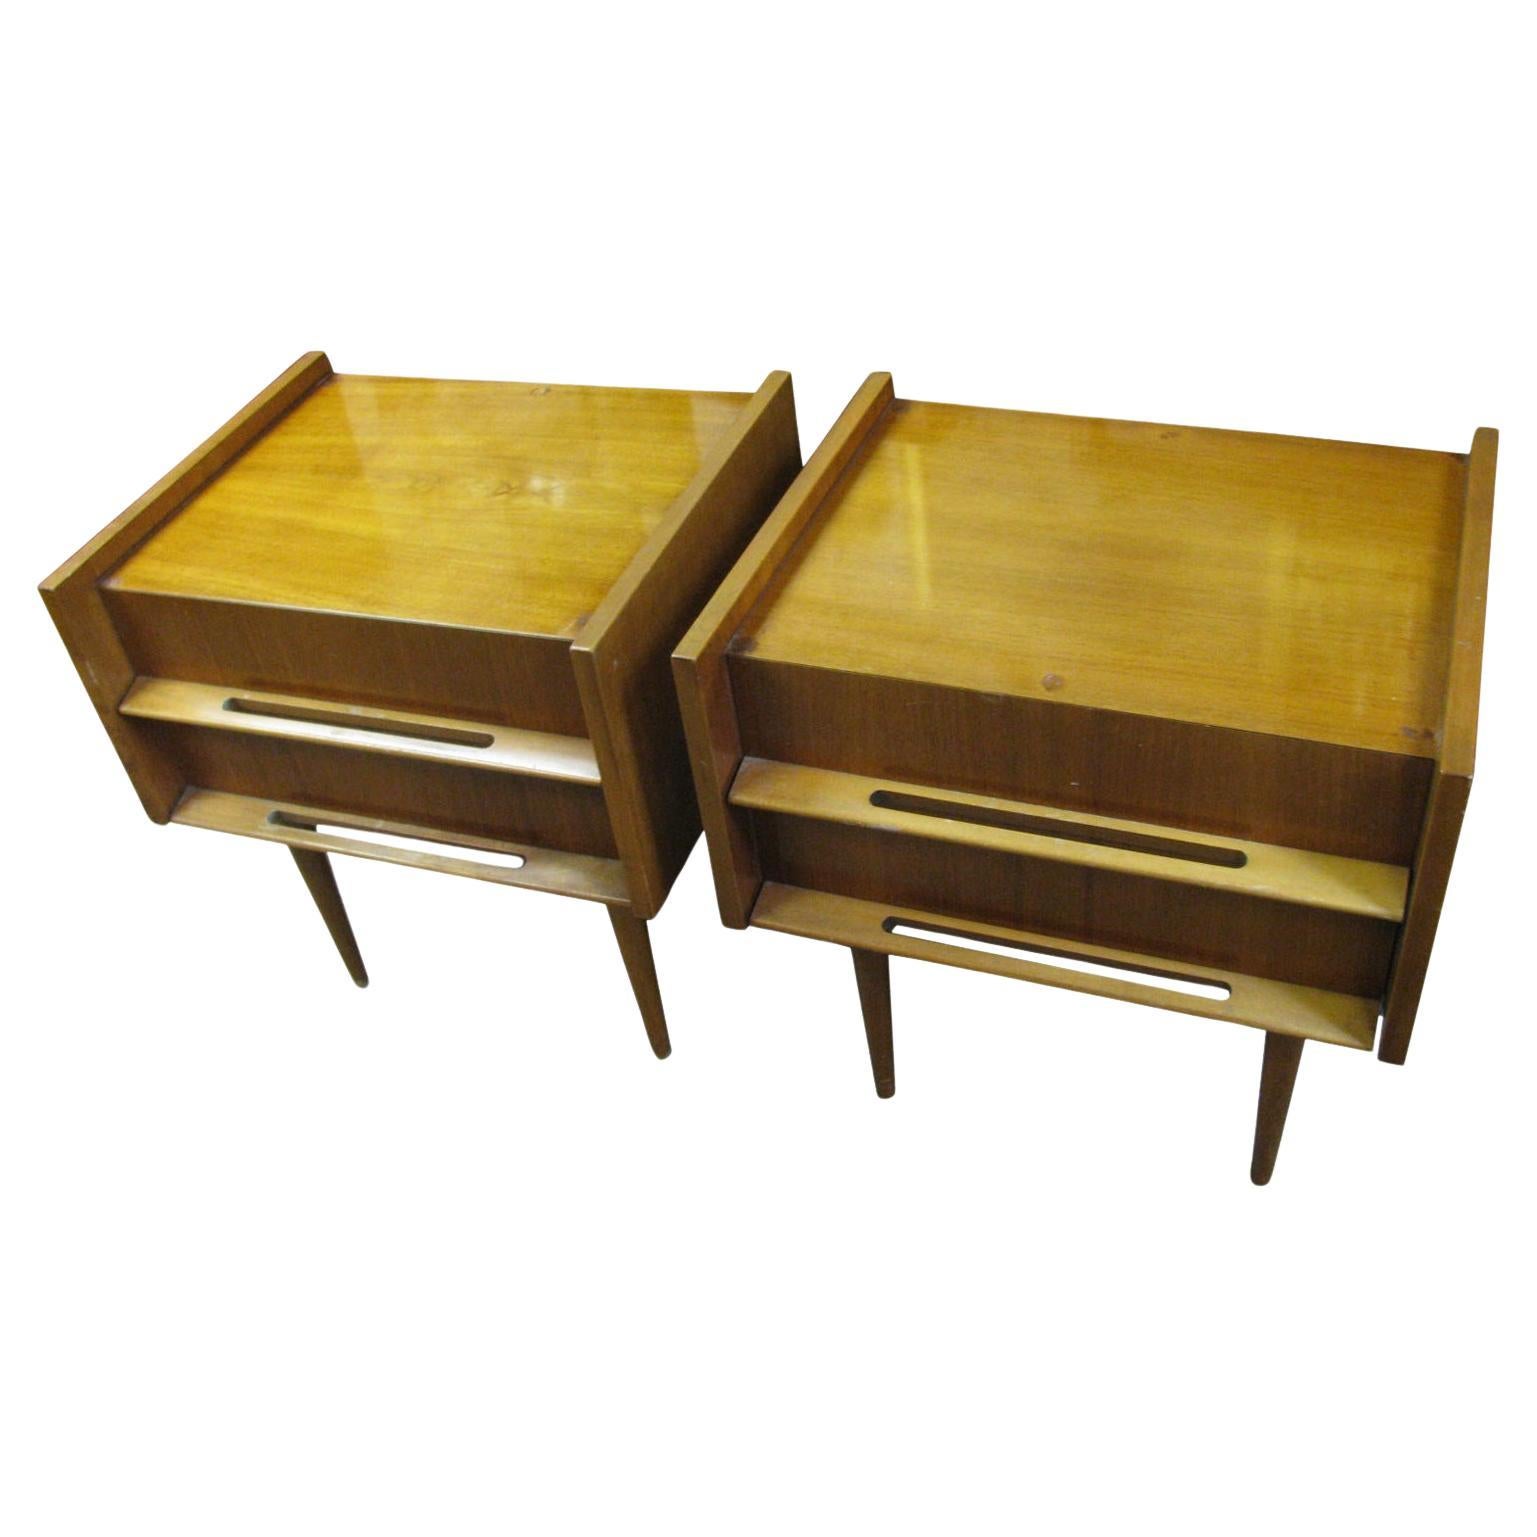 Pair of Edmond Spence Mid-Century Modern Night Tables, Made in Sweden In Good Condition For Sale In Port Jervis, NY